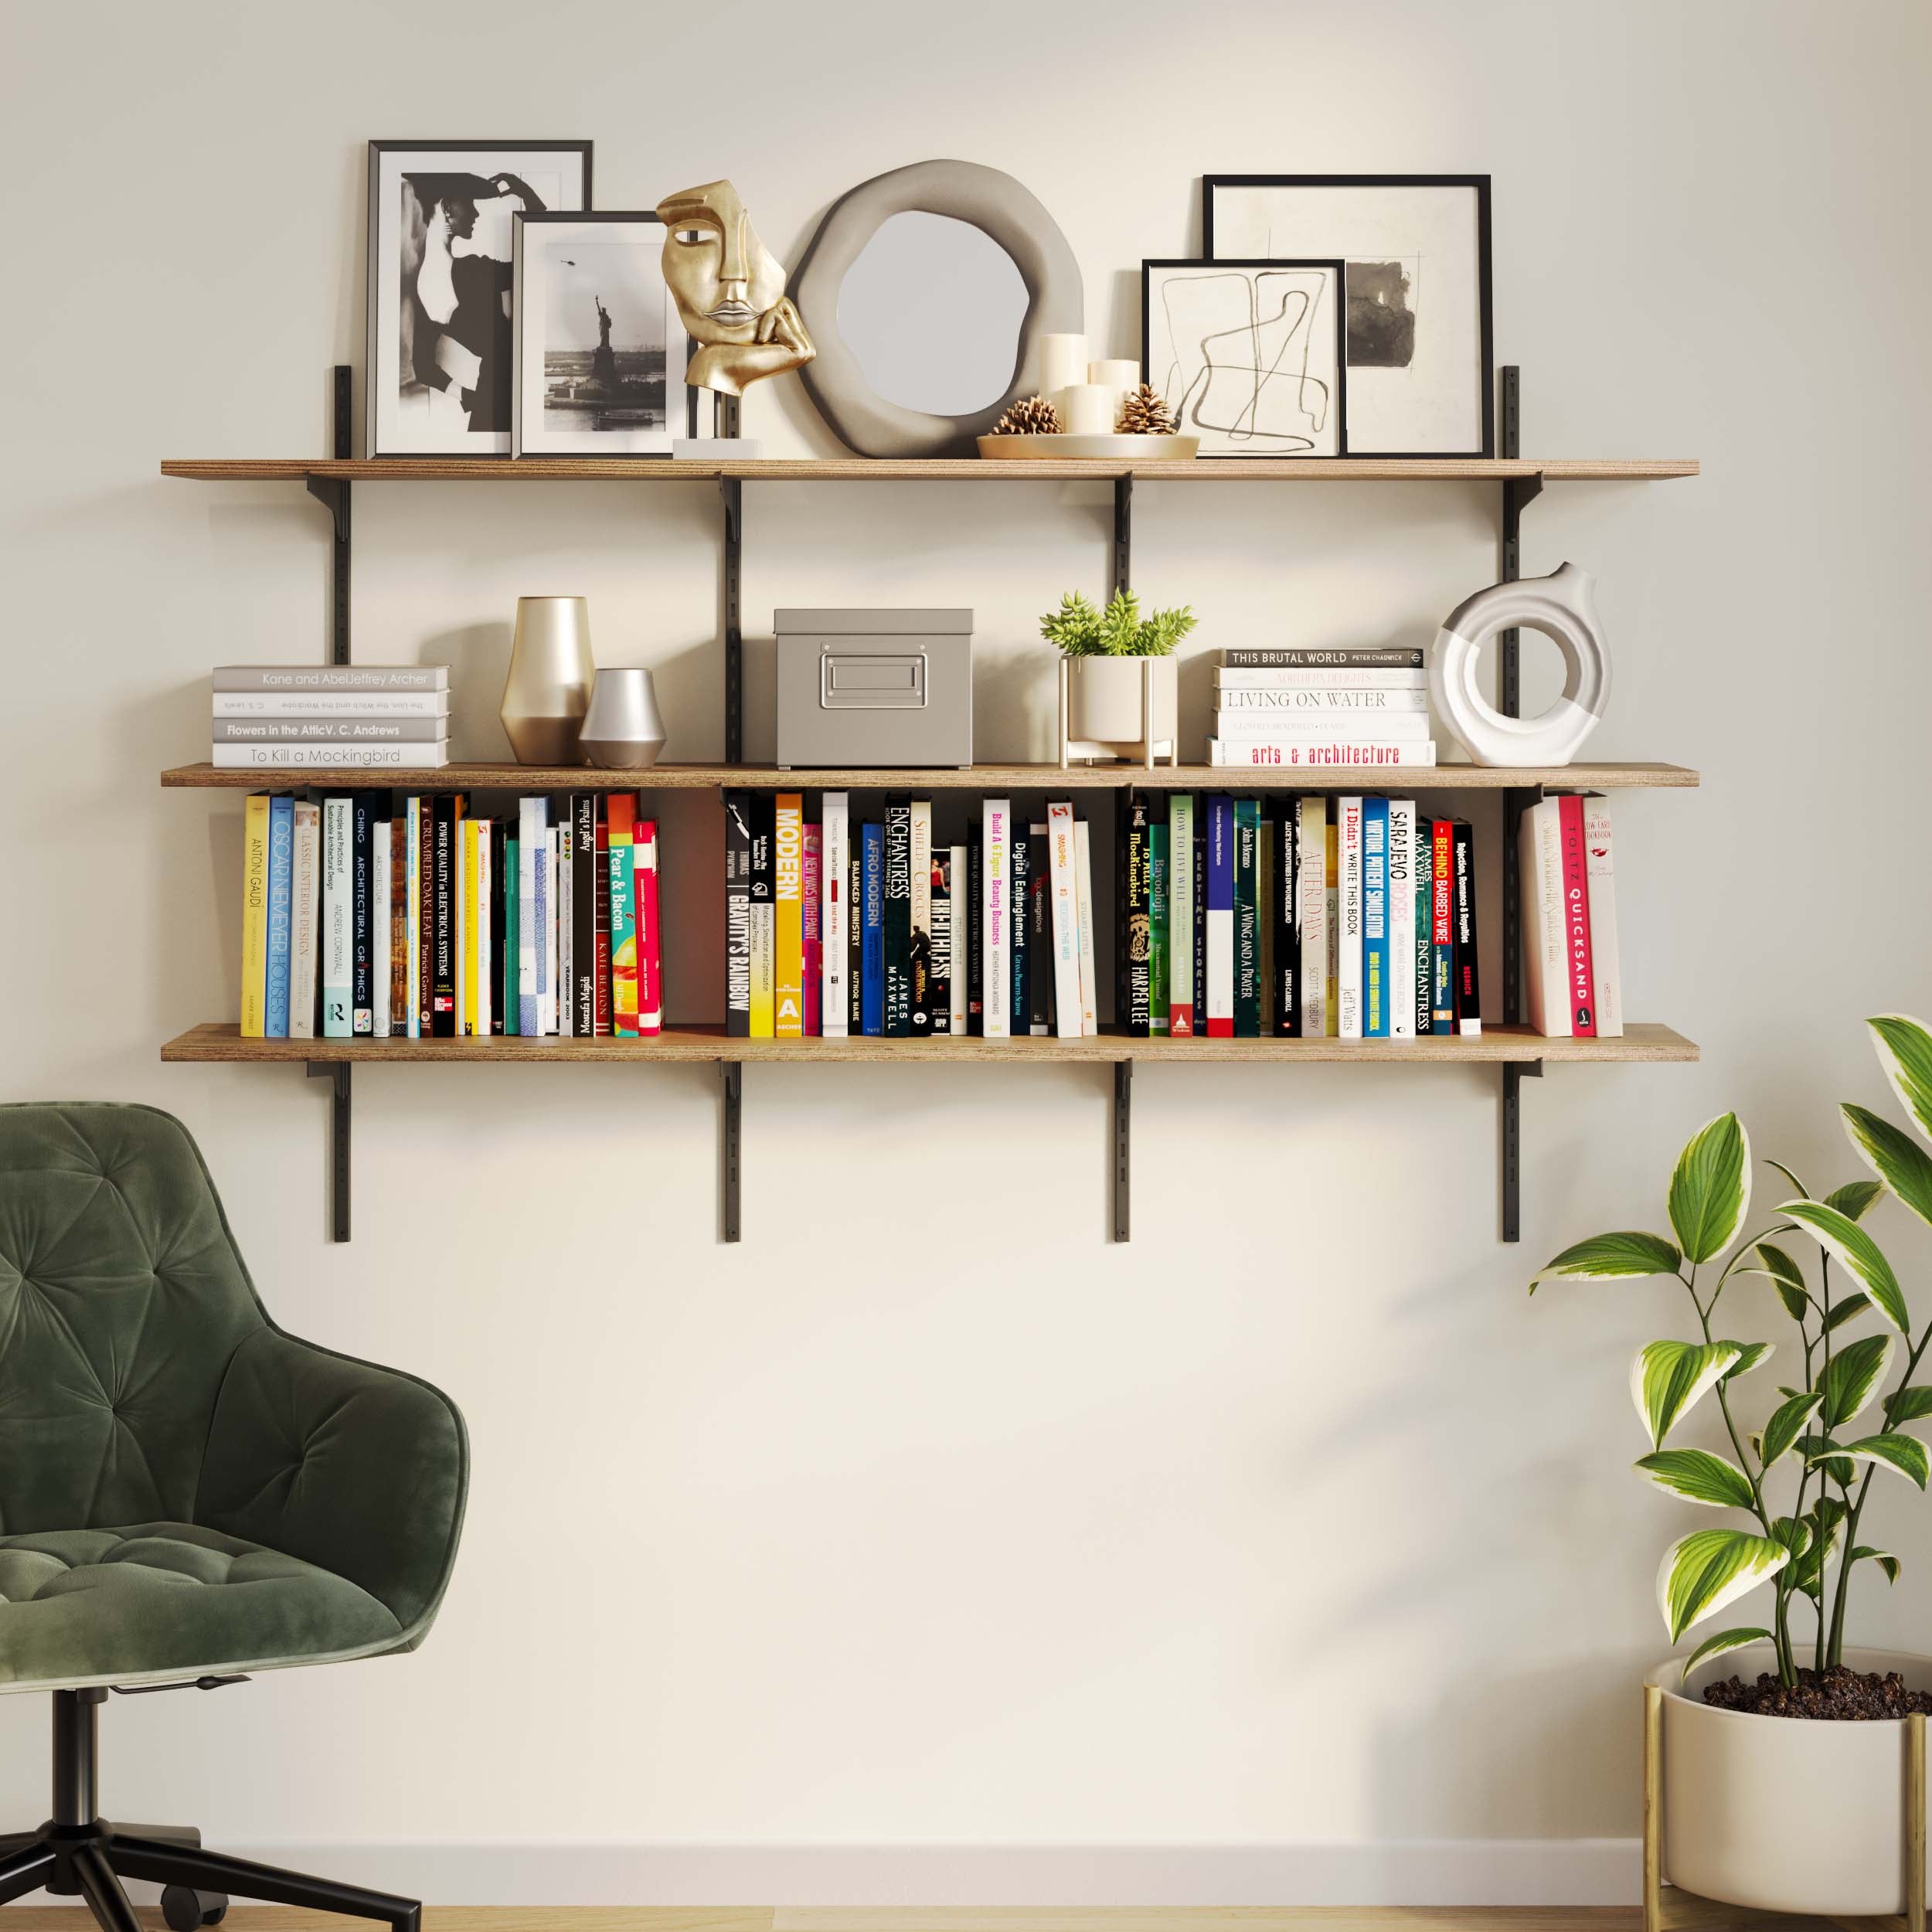 Hanging book shelves for wall filled with colorful books, artistic sculptures, and diverse frames, complemented by a chic green armchair and a vibrant plant to the right.